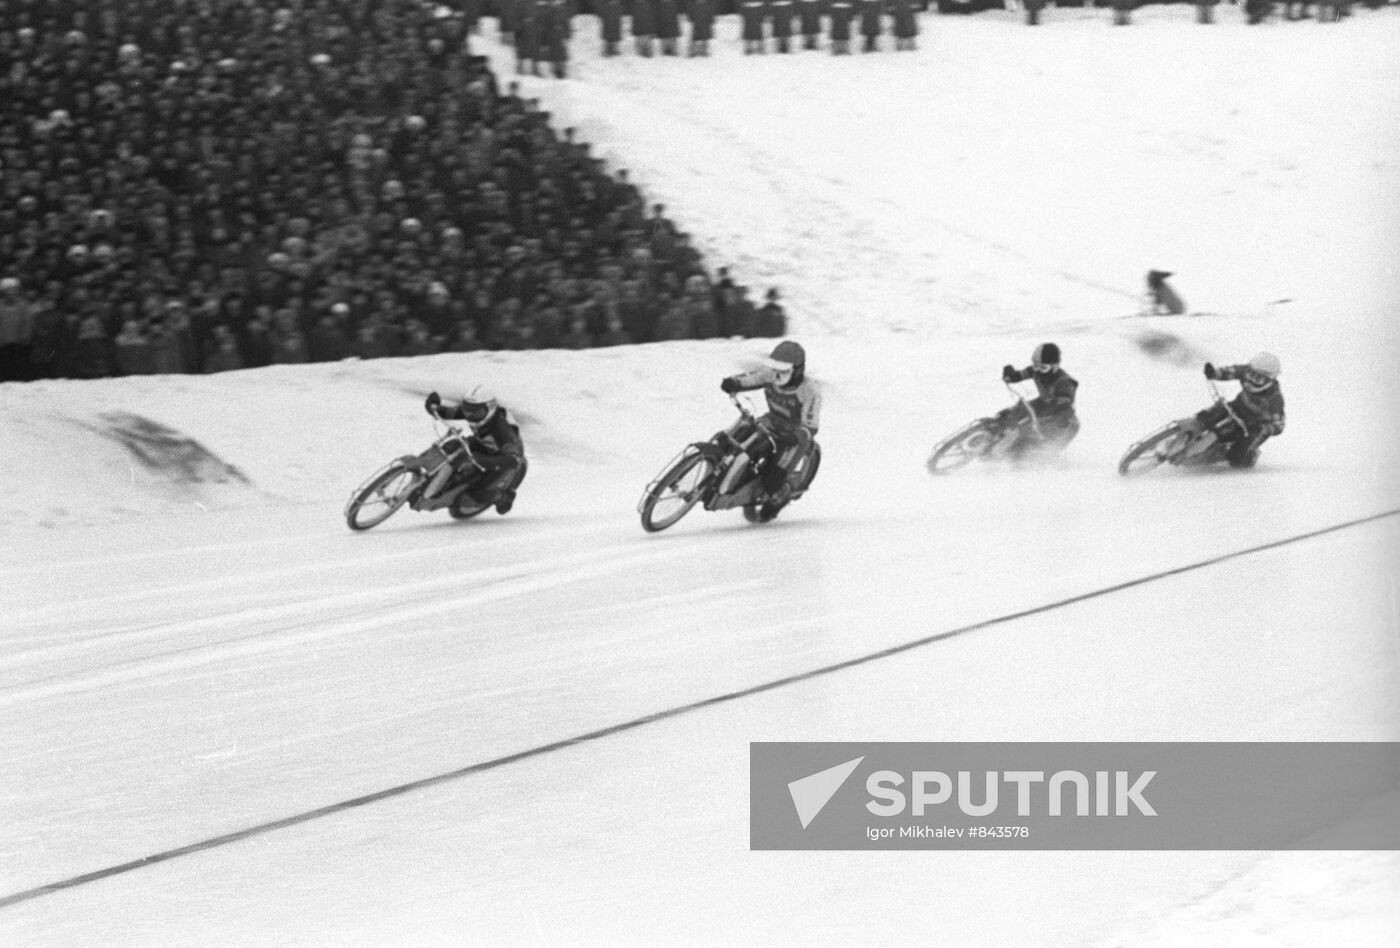 During Ice Motorcycle Racing